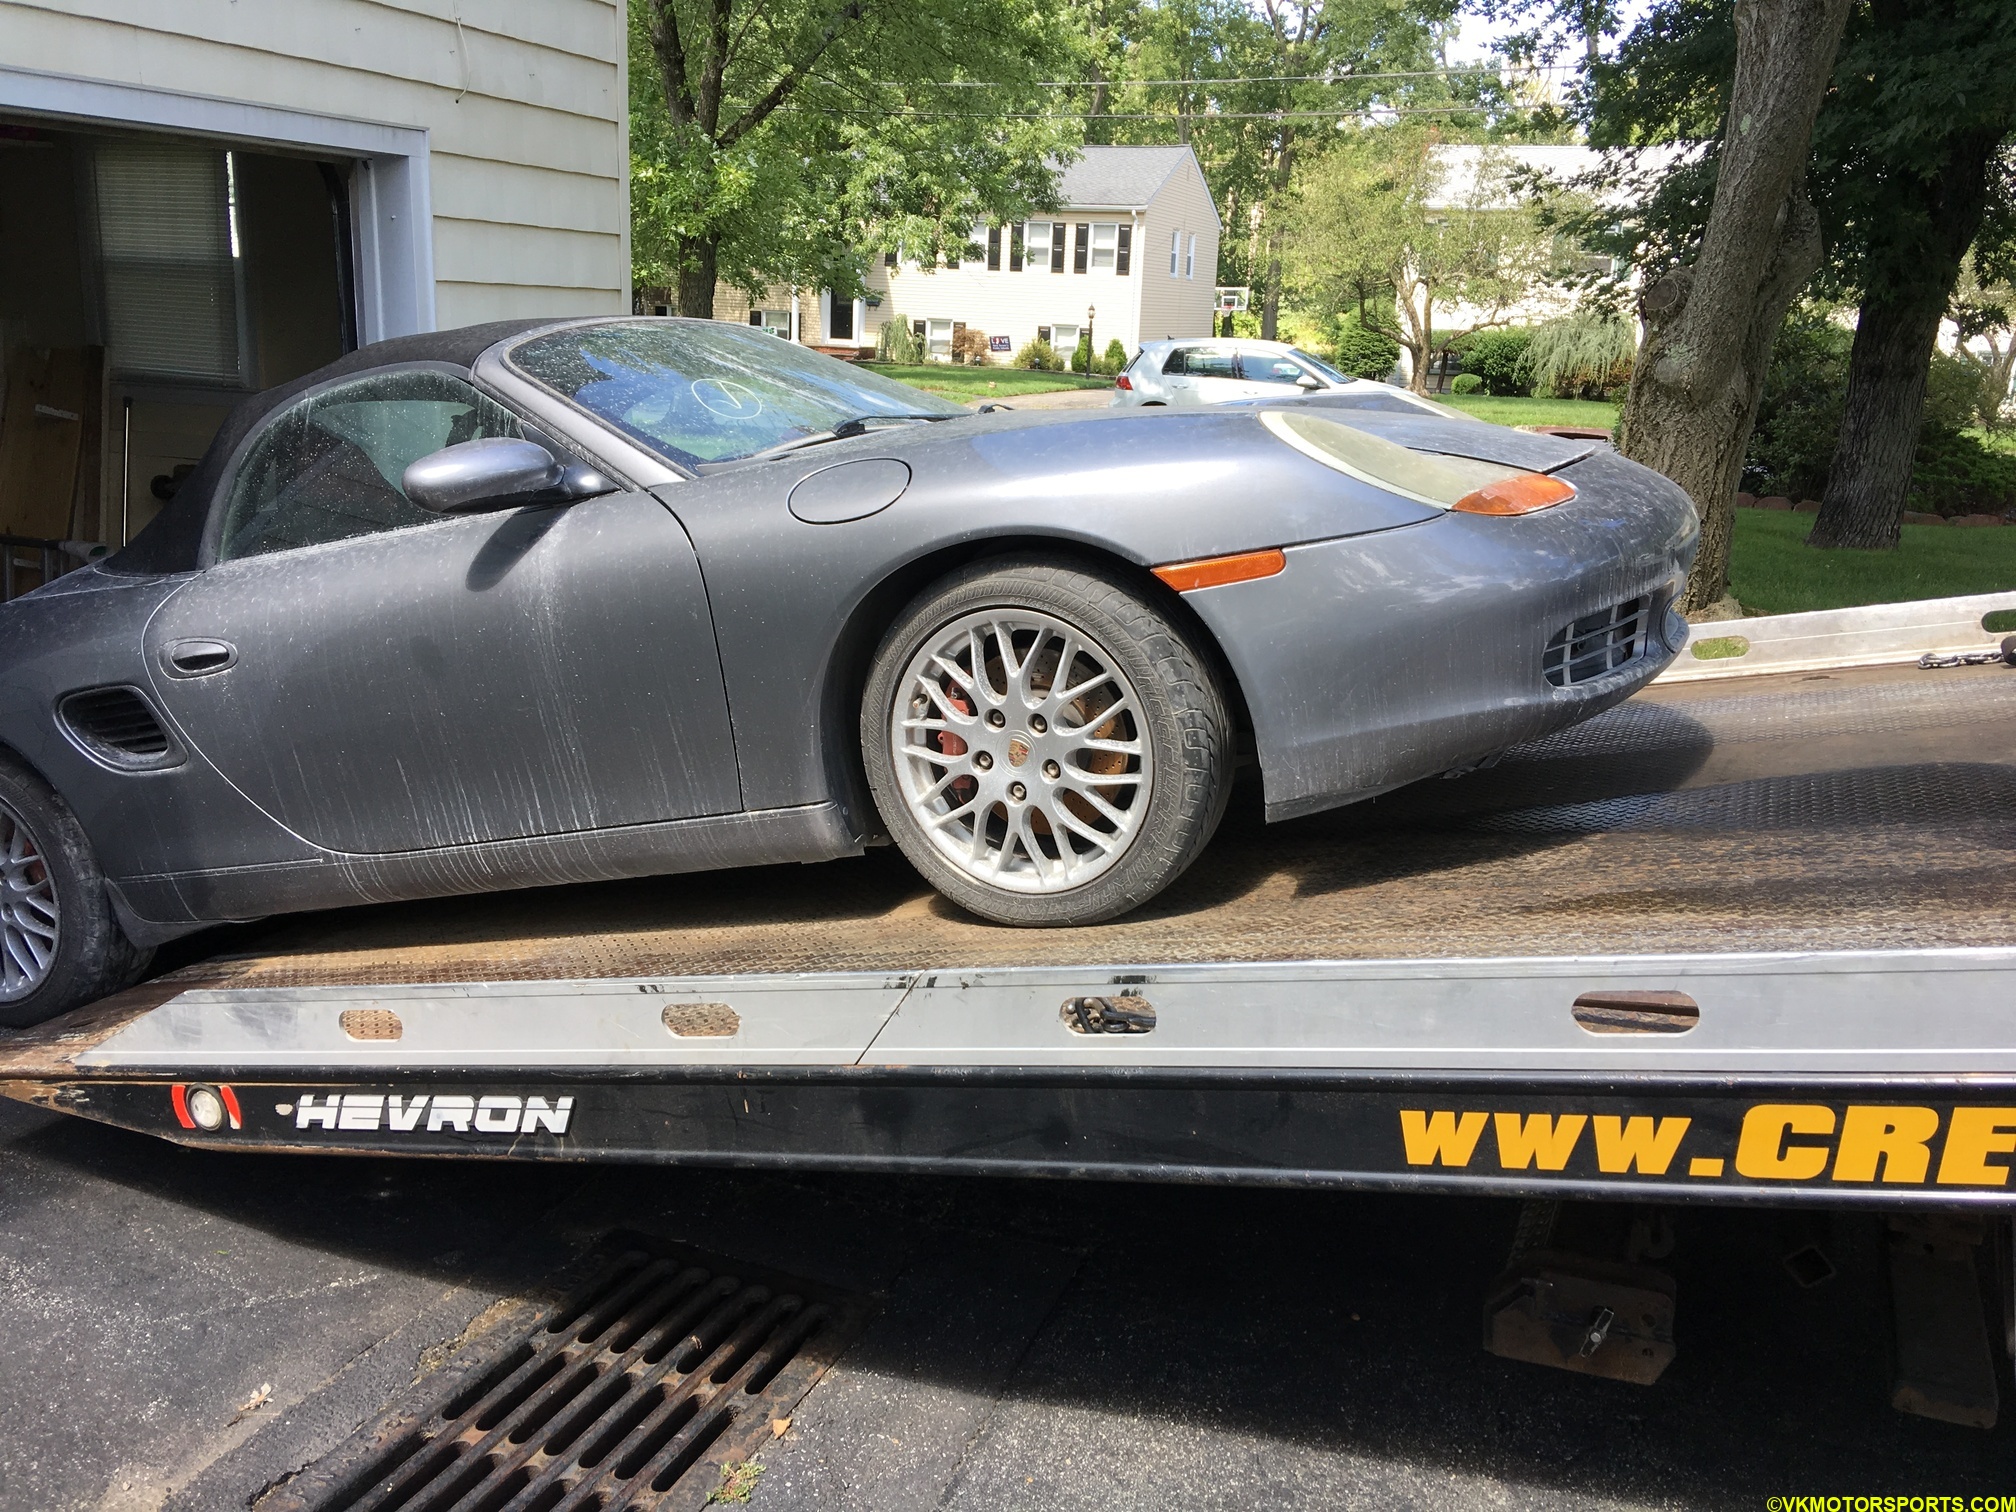 Figure 11. Boxster unloading from the flat-bed tow truck